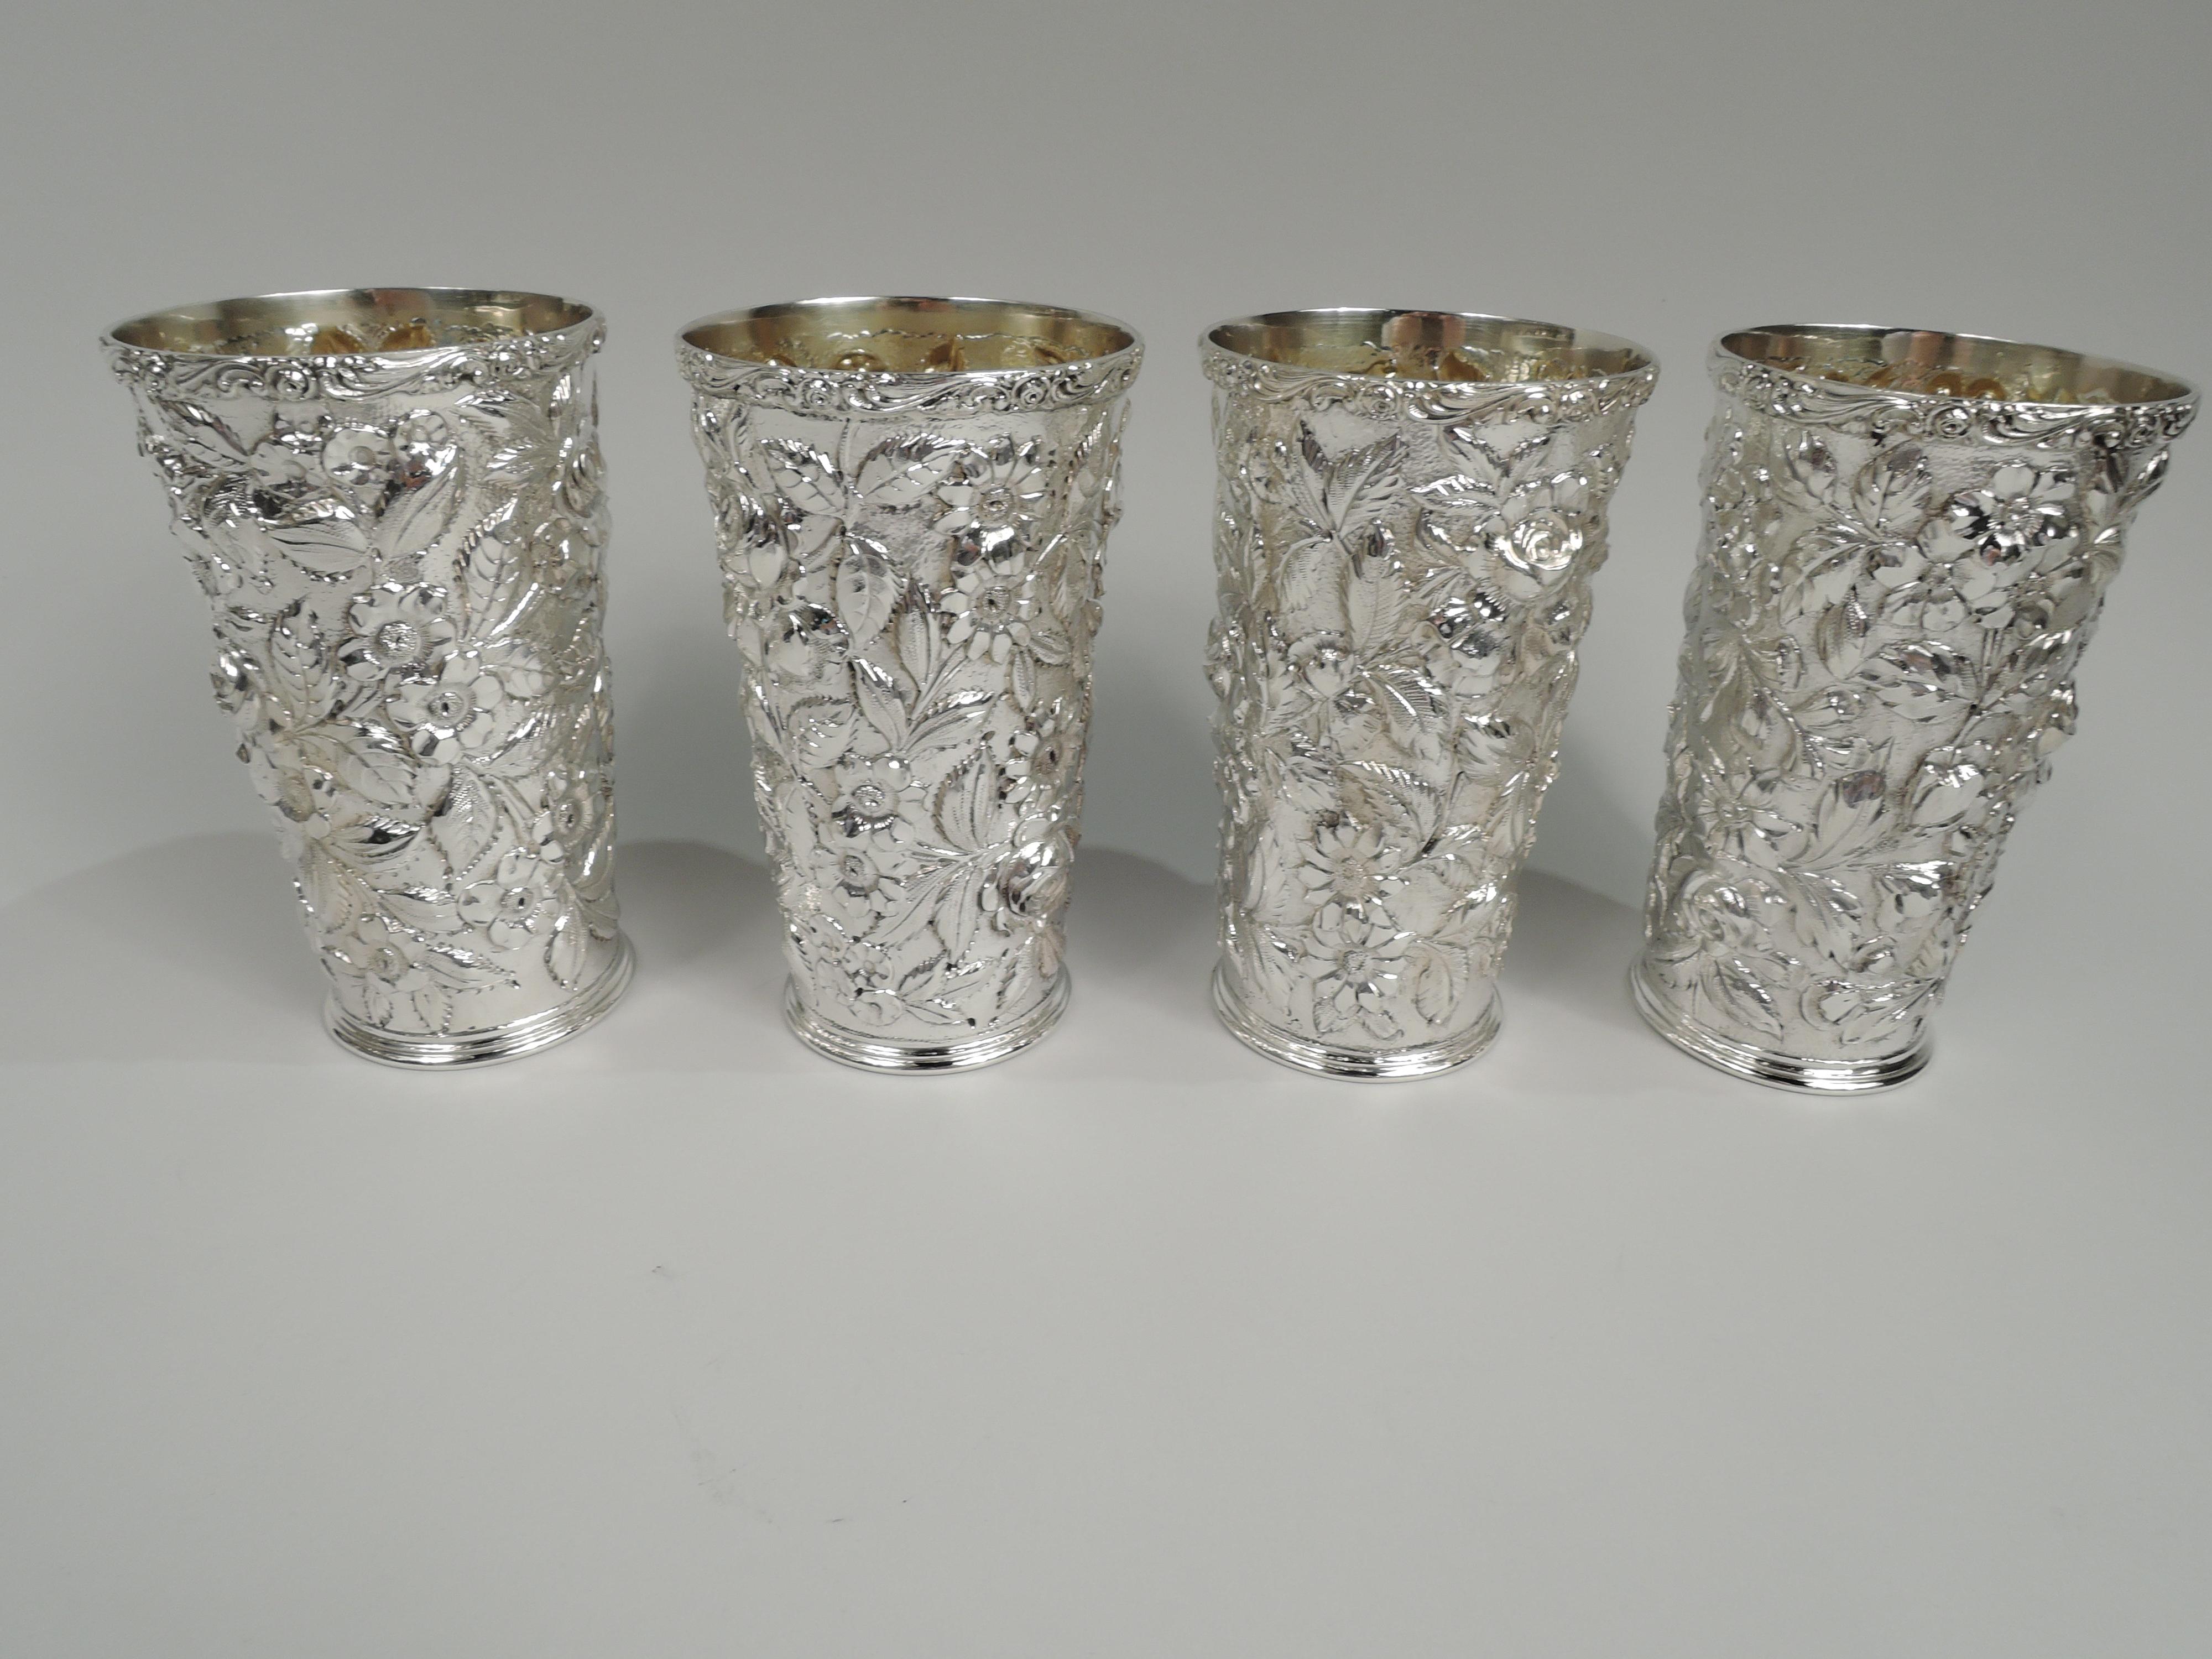 Edwardian Set of 12 Schofield Baltimore Repousse Sterling Silver Highballs